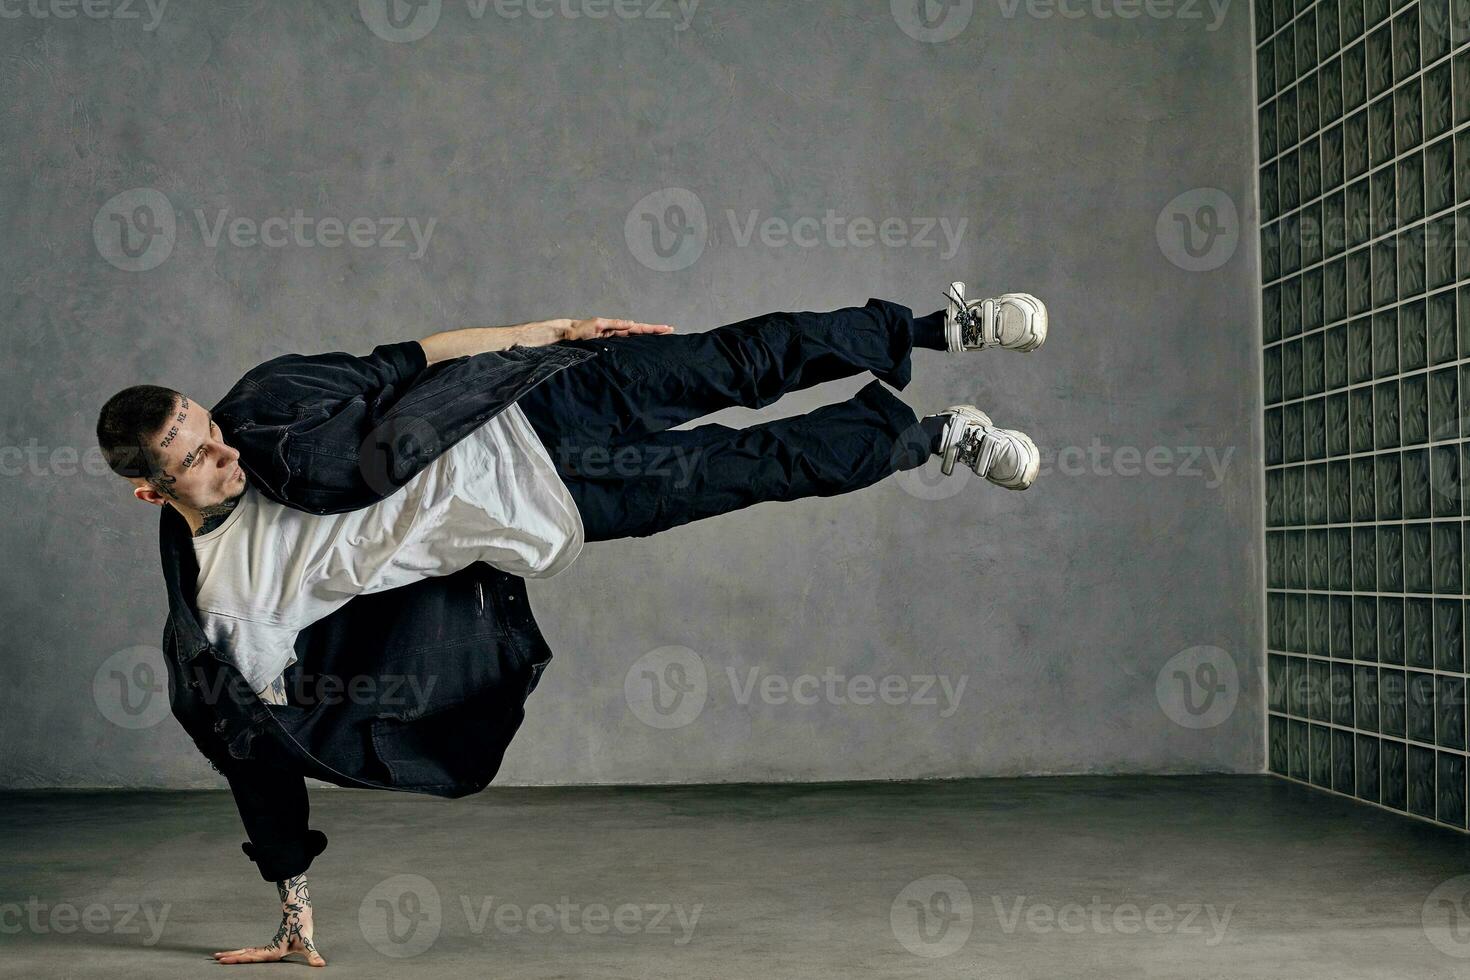 Guy with tattooed body, beard. Dressed in white t-shirt and sneakers, black shirt, pants. Showing tricks on gray background. Dancehall, hip-hop photo